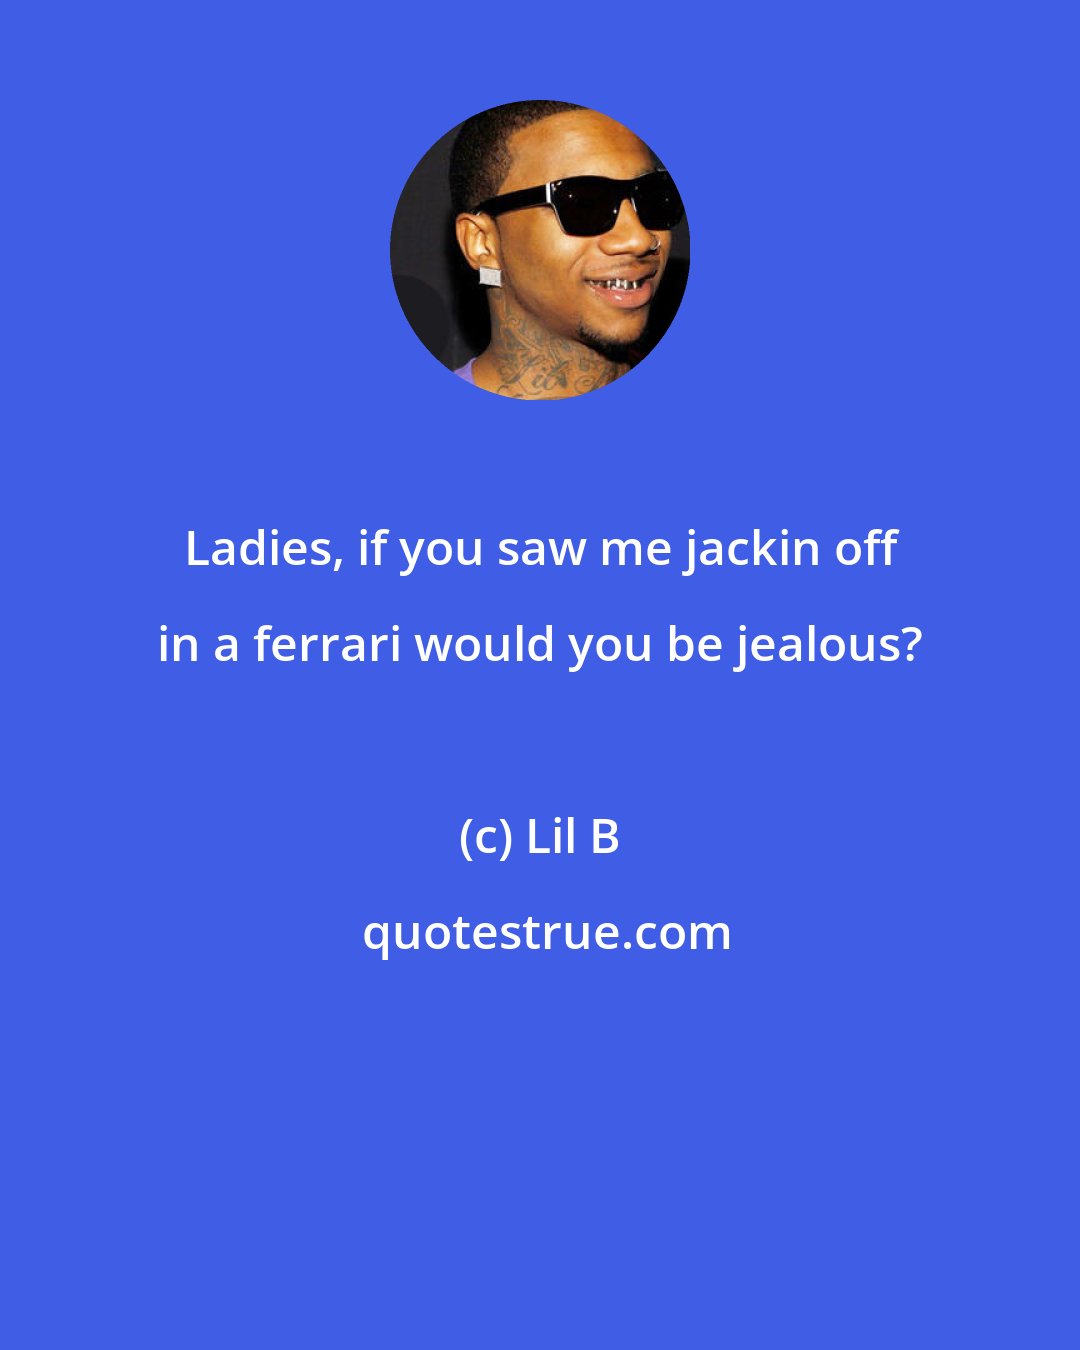 Lil B: Ladies, if you saw me jackin off in a ferrari would you be jealous?